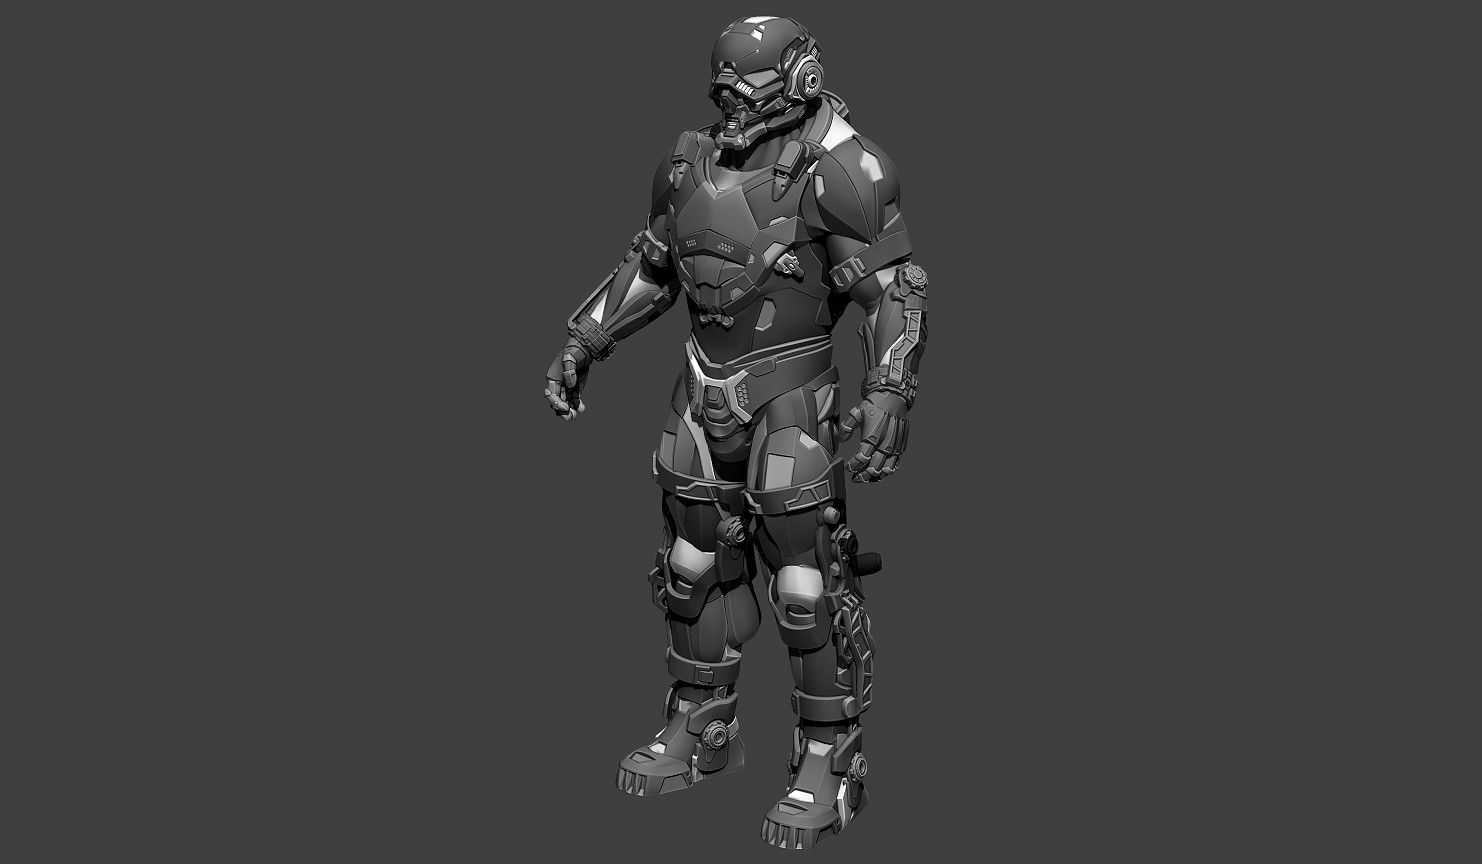 ArtStation - Cyber Soldier Zbrush | Resources